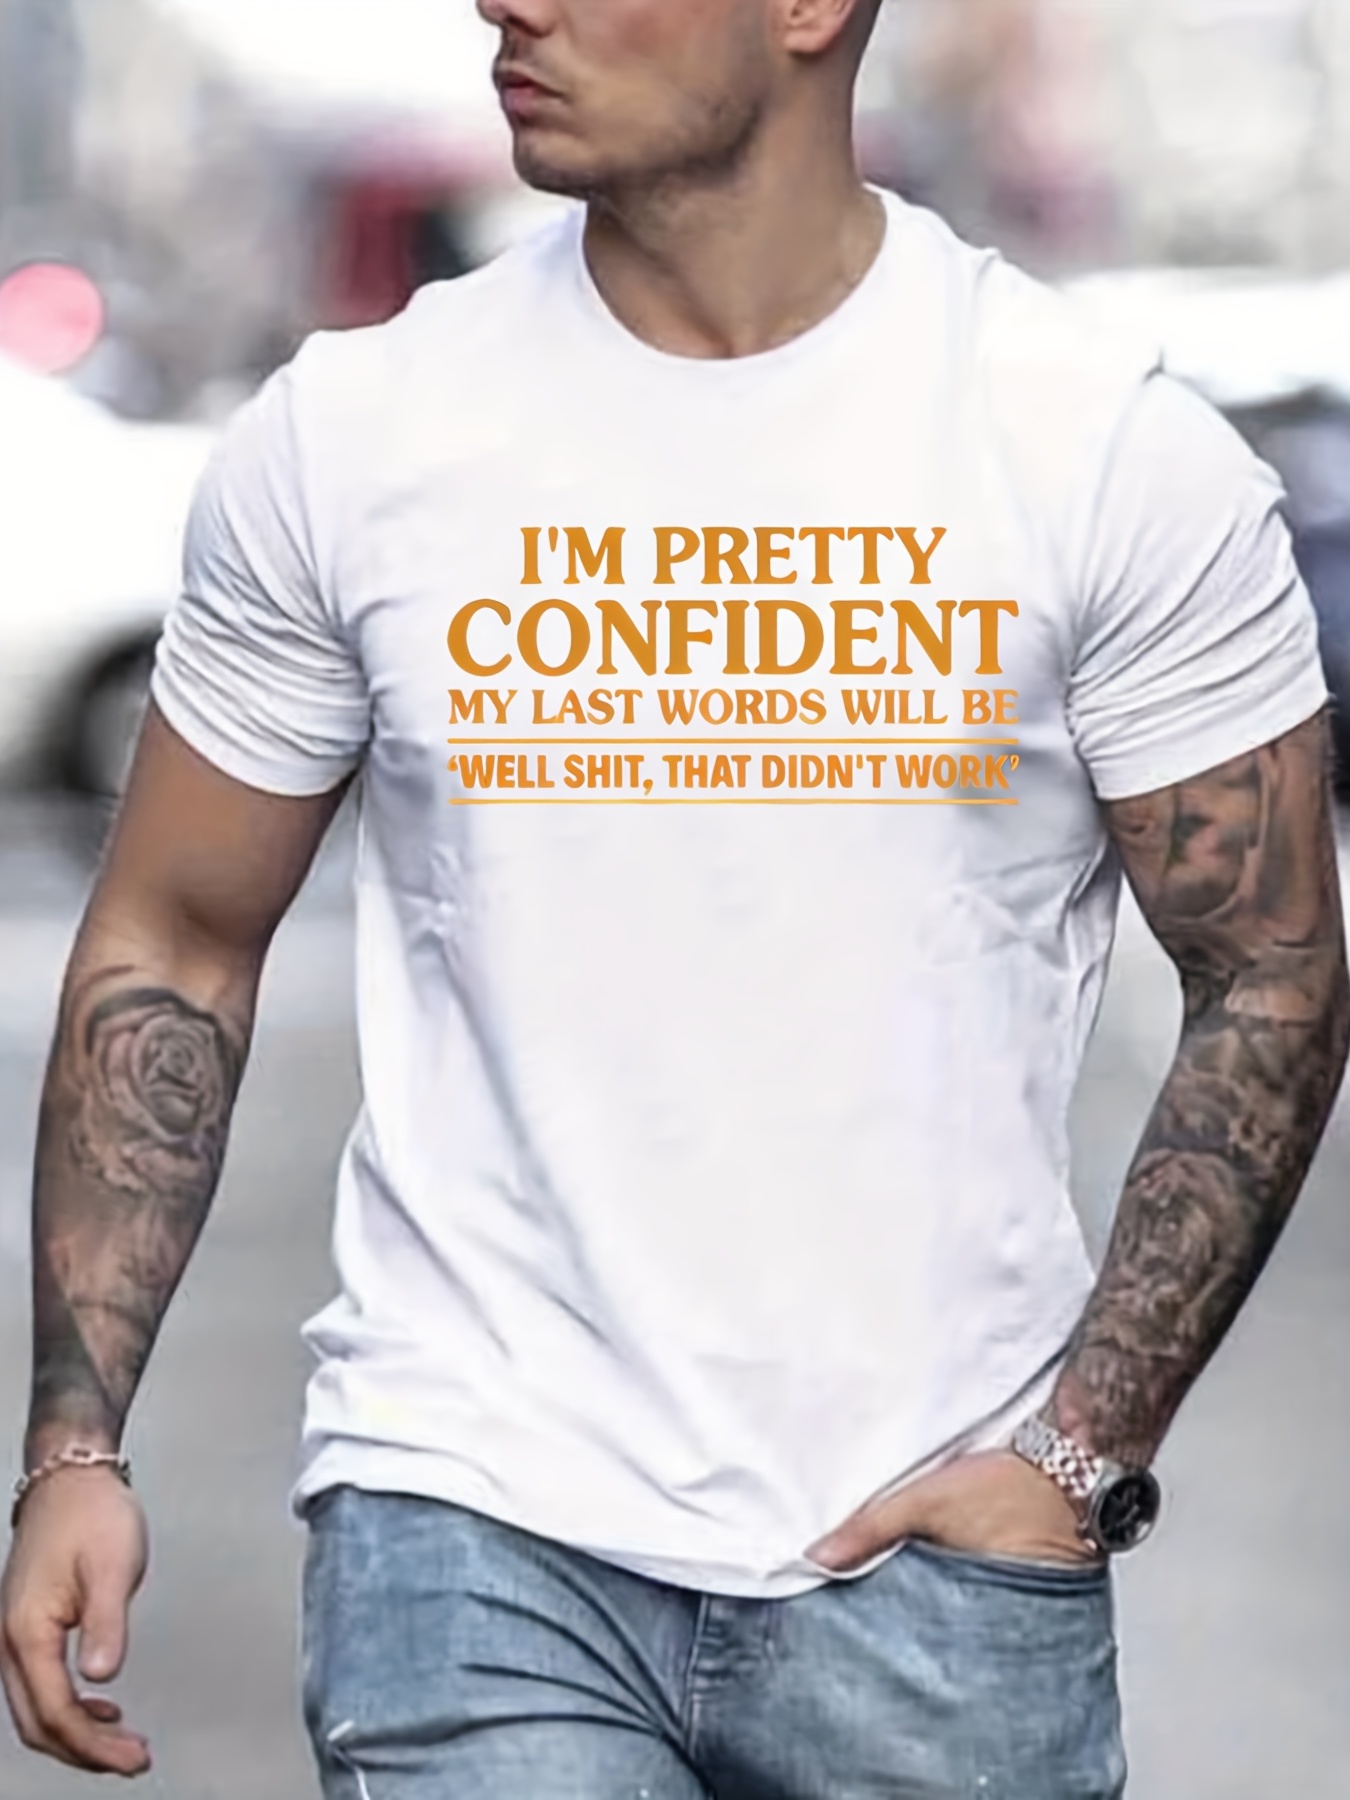 powerful slogan print mens graphic design crew neck t shirt casual comfy tees t shirts for summer mens clothing tops details 24